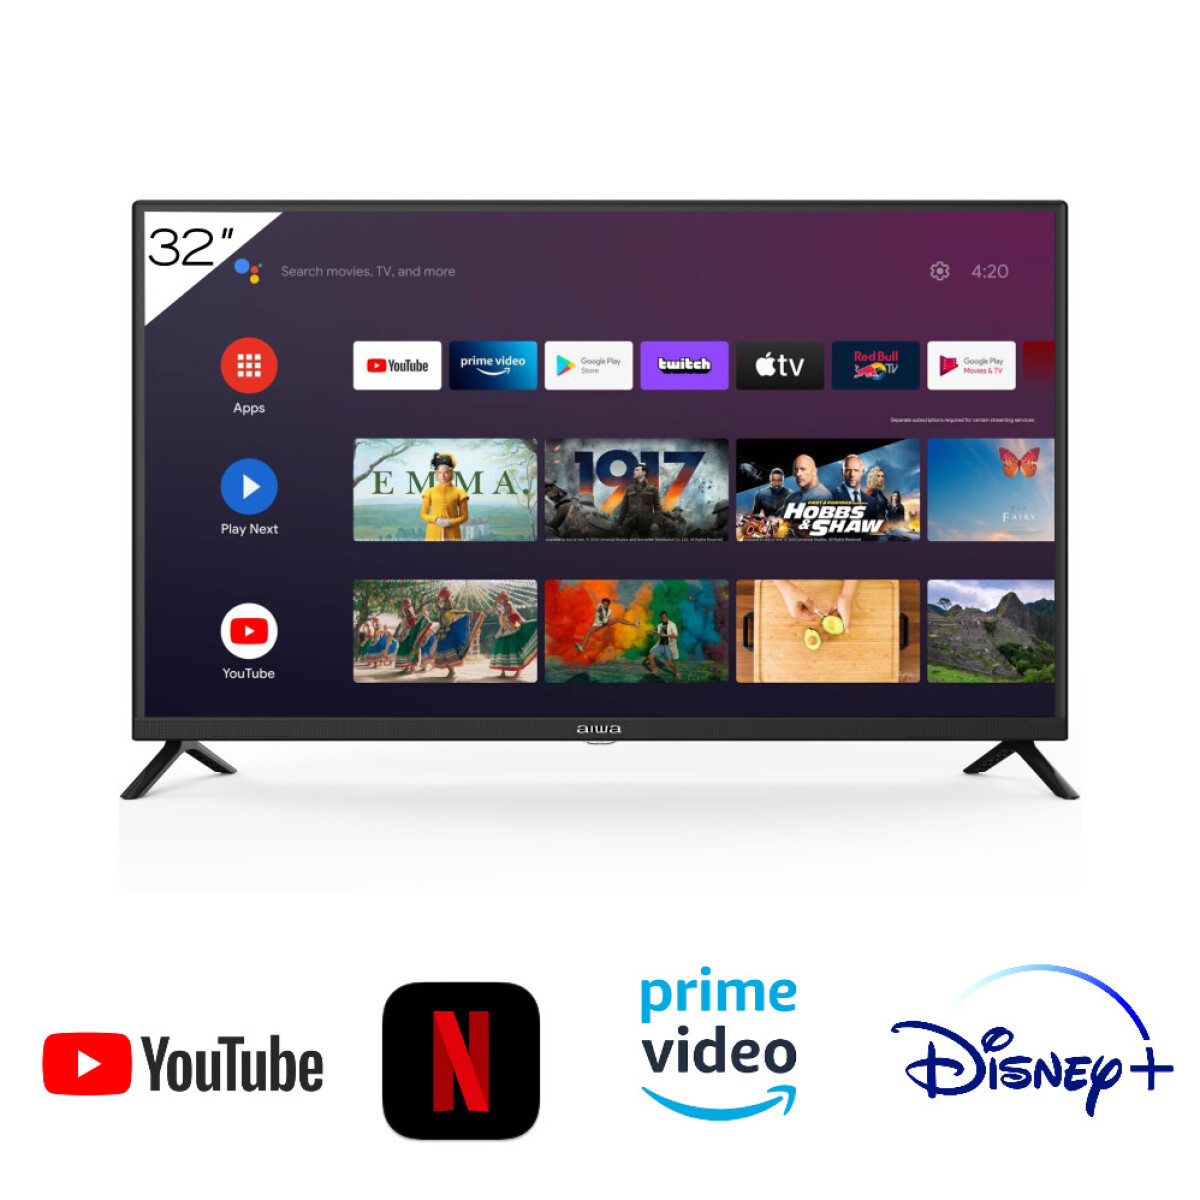 Smart tv aiwa 32' hd 720p | stereo | androidtv | chromecast built-in - Negro 